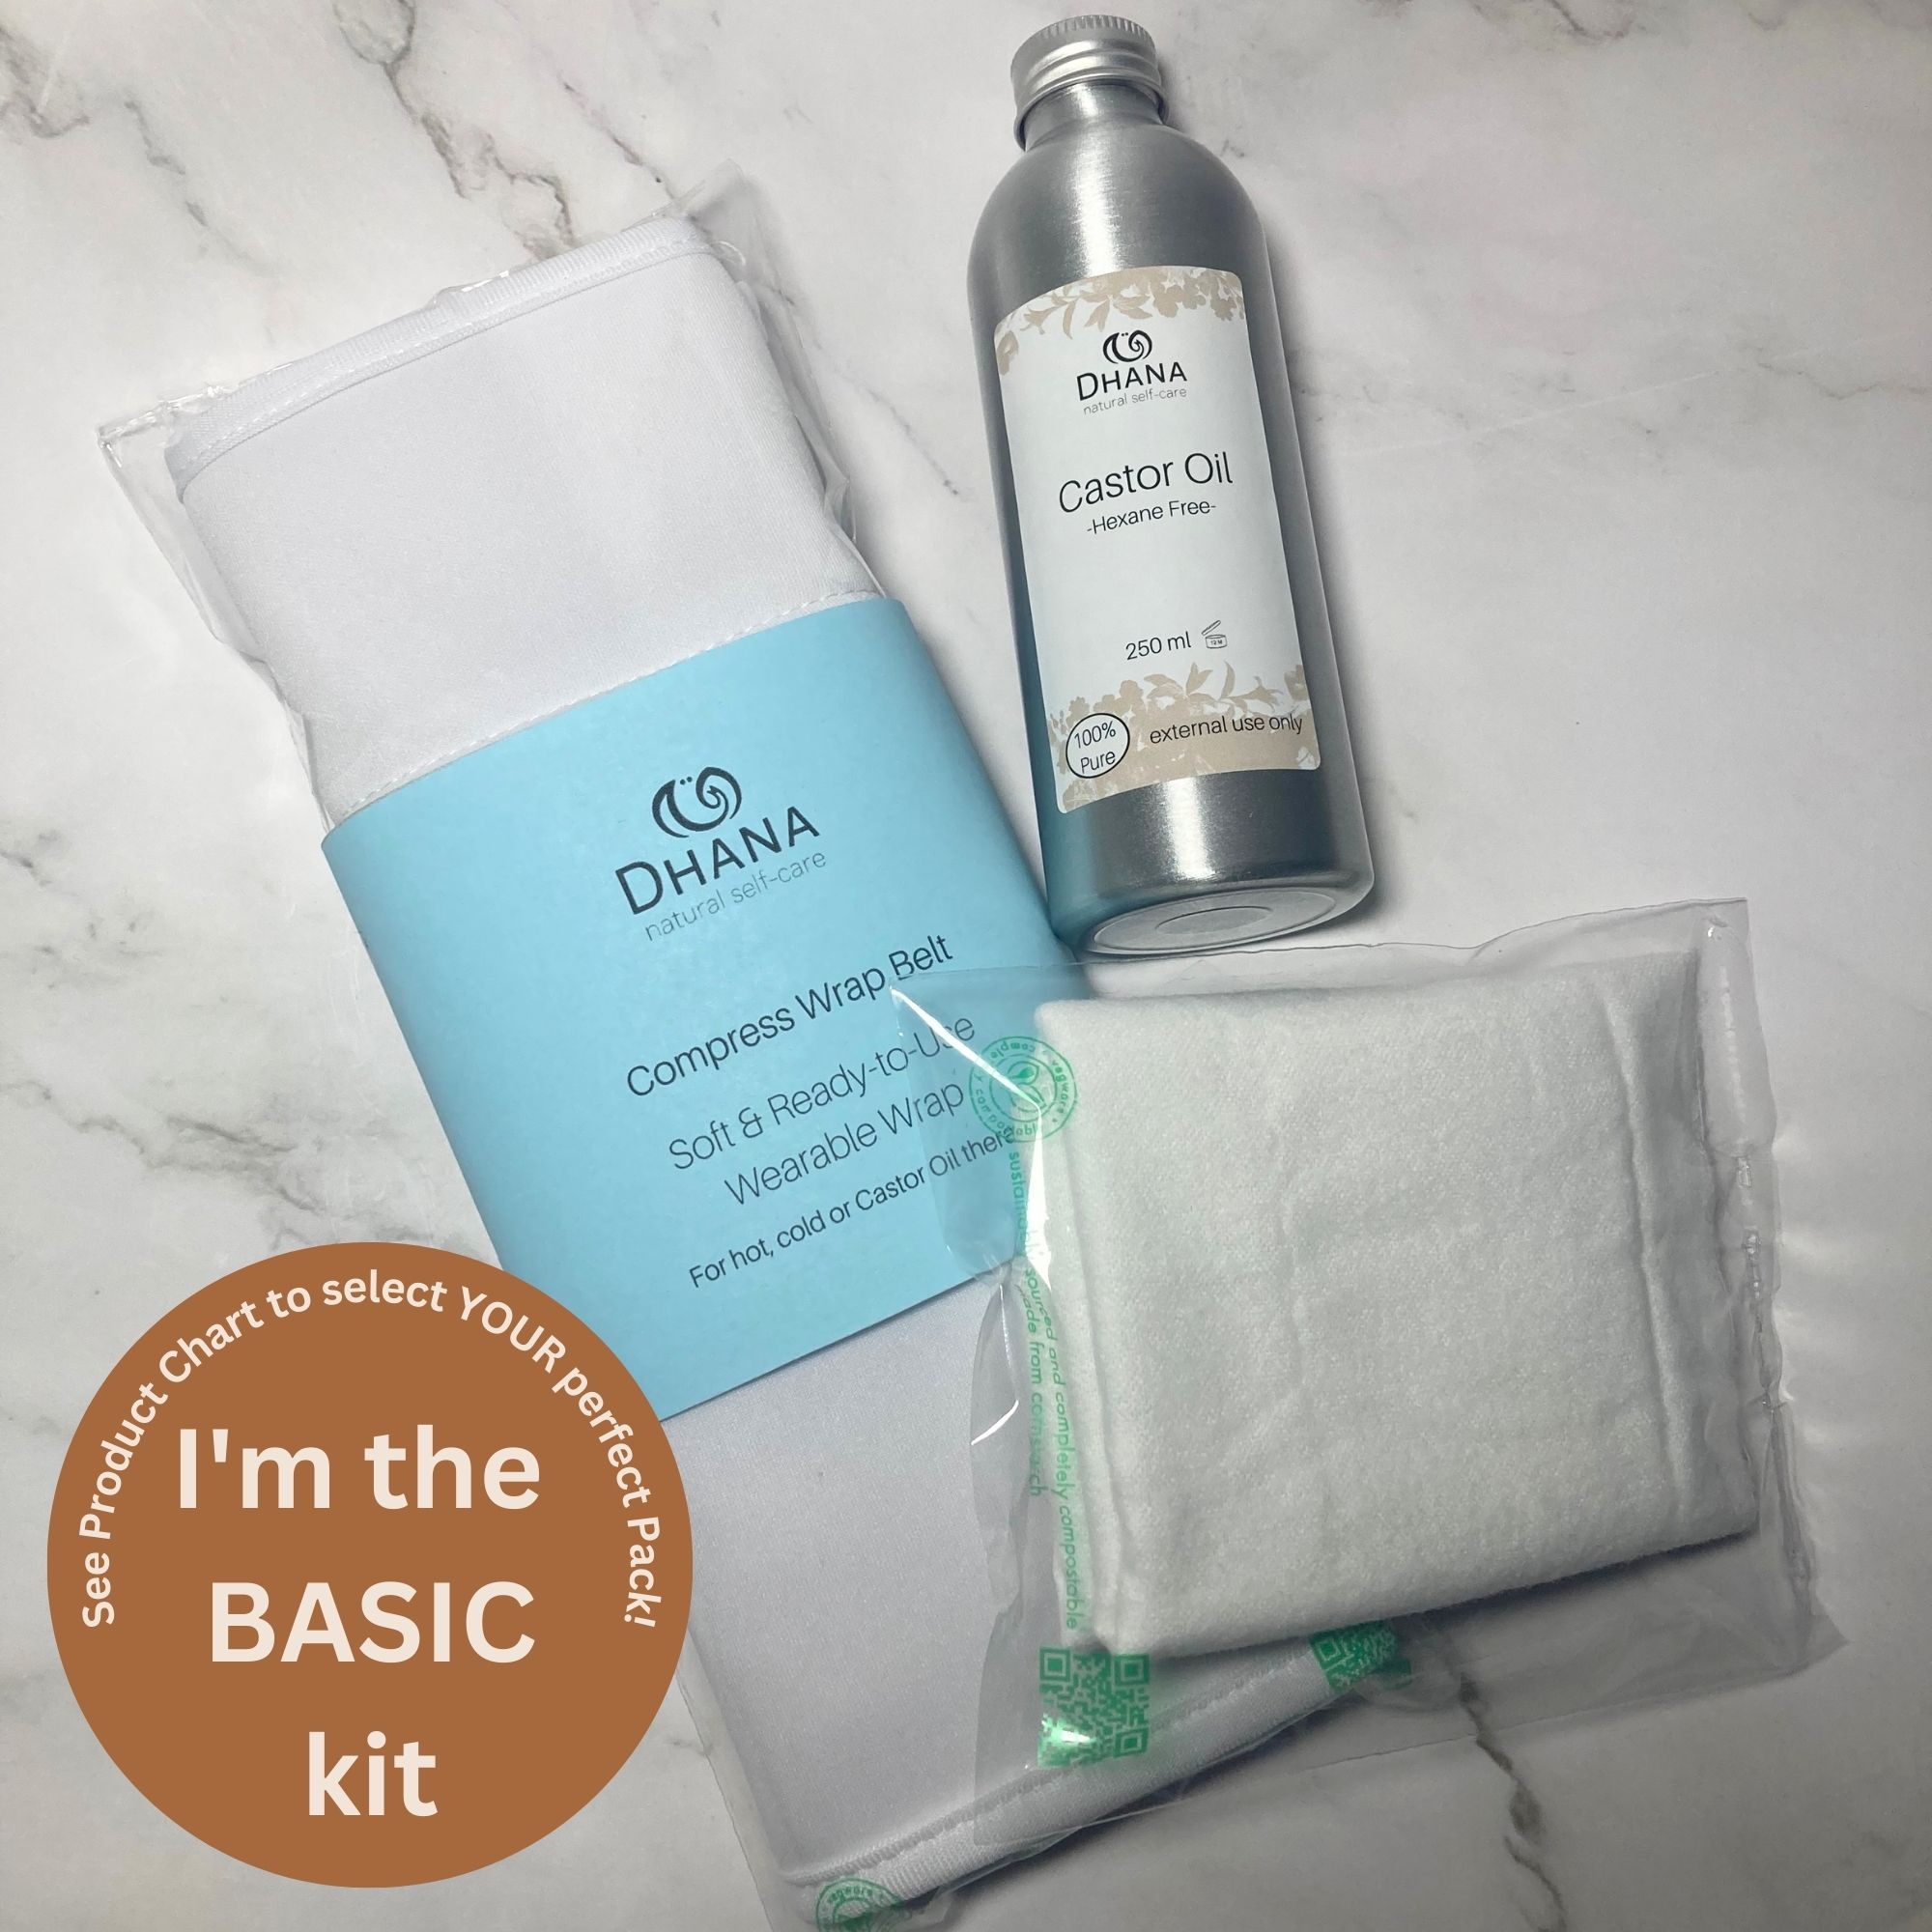 Dhana Self-Care Basic Castor Oil Pack Kit (contains flannel folded, bottle of oil, and Compress wrap belt) on white marble background.